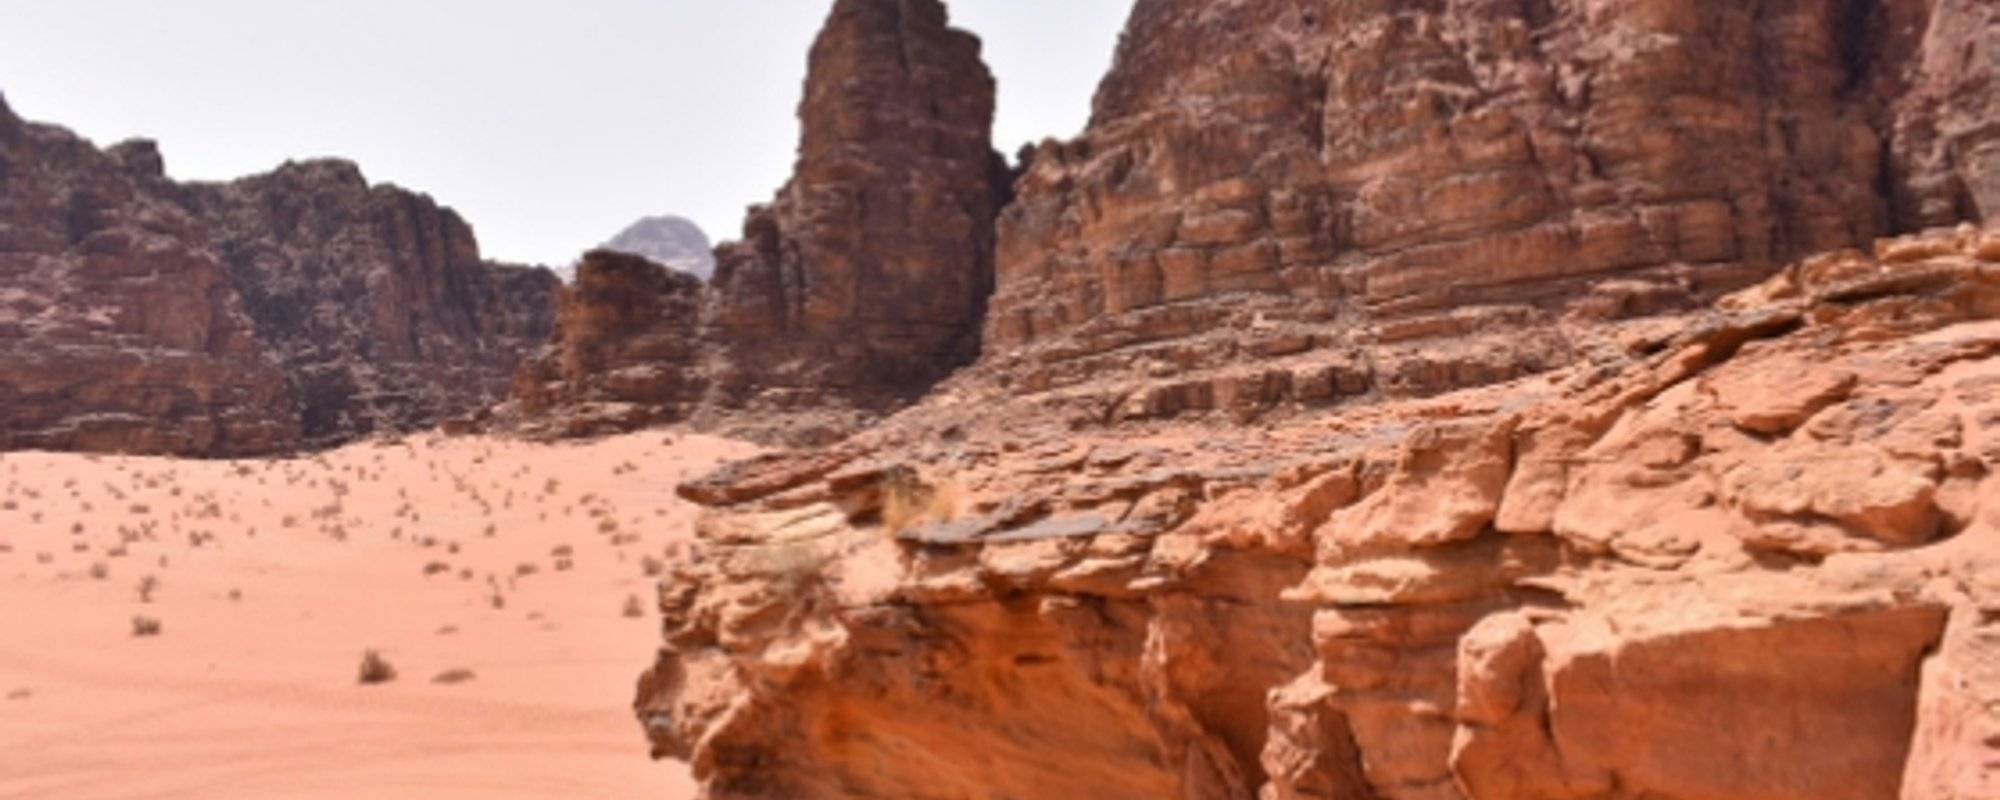 Wadi Rum: because you don’t need to be Elon Musk’s friend to go to Mars!